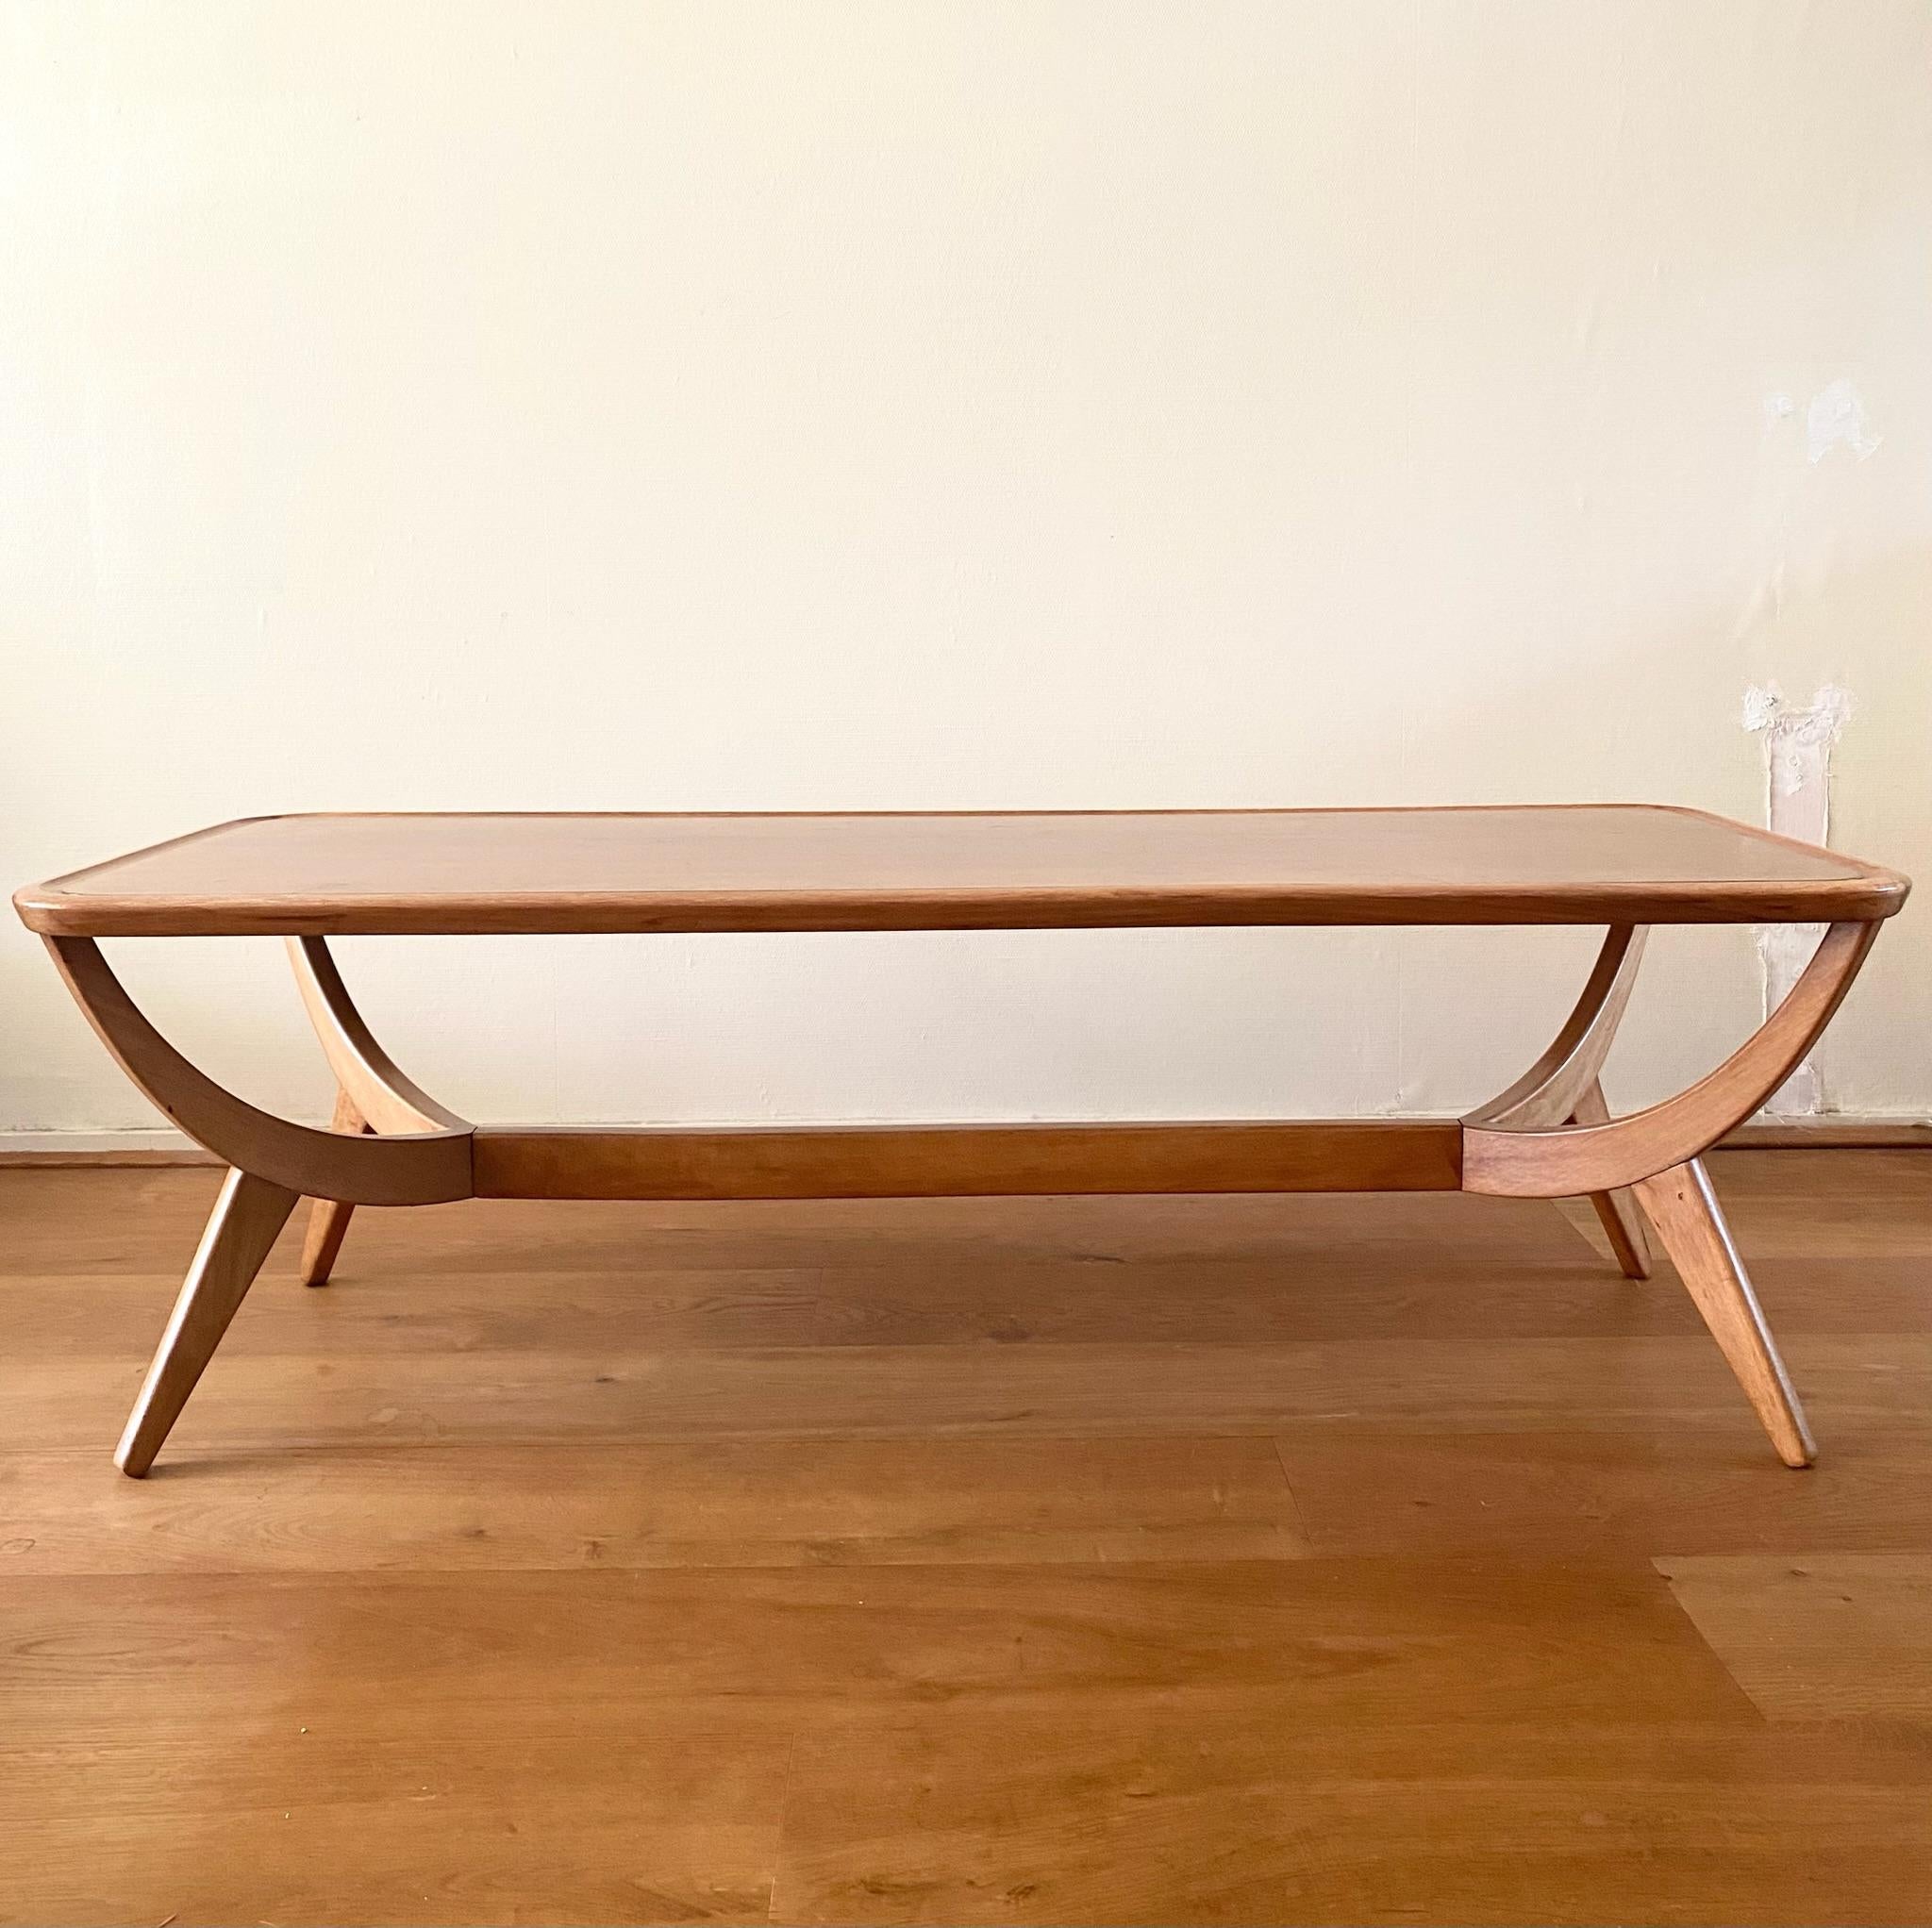 Elegant Classic style coffee table from the Poly Z series, designed by Abraham Patijn for Zijlstra Joure in ca. the 1950s. Organic shaped frame in Walnut and walnut veneer. The table remains in good condition with wear consisting with age and use.